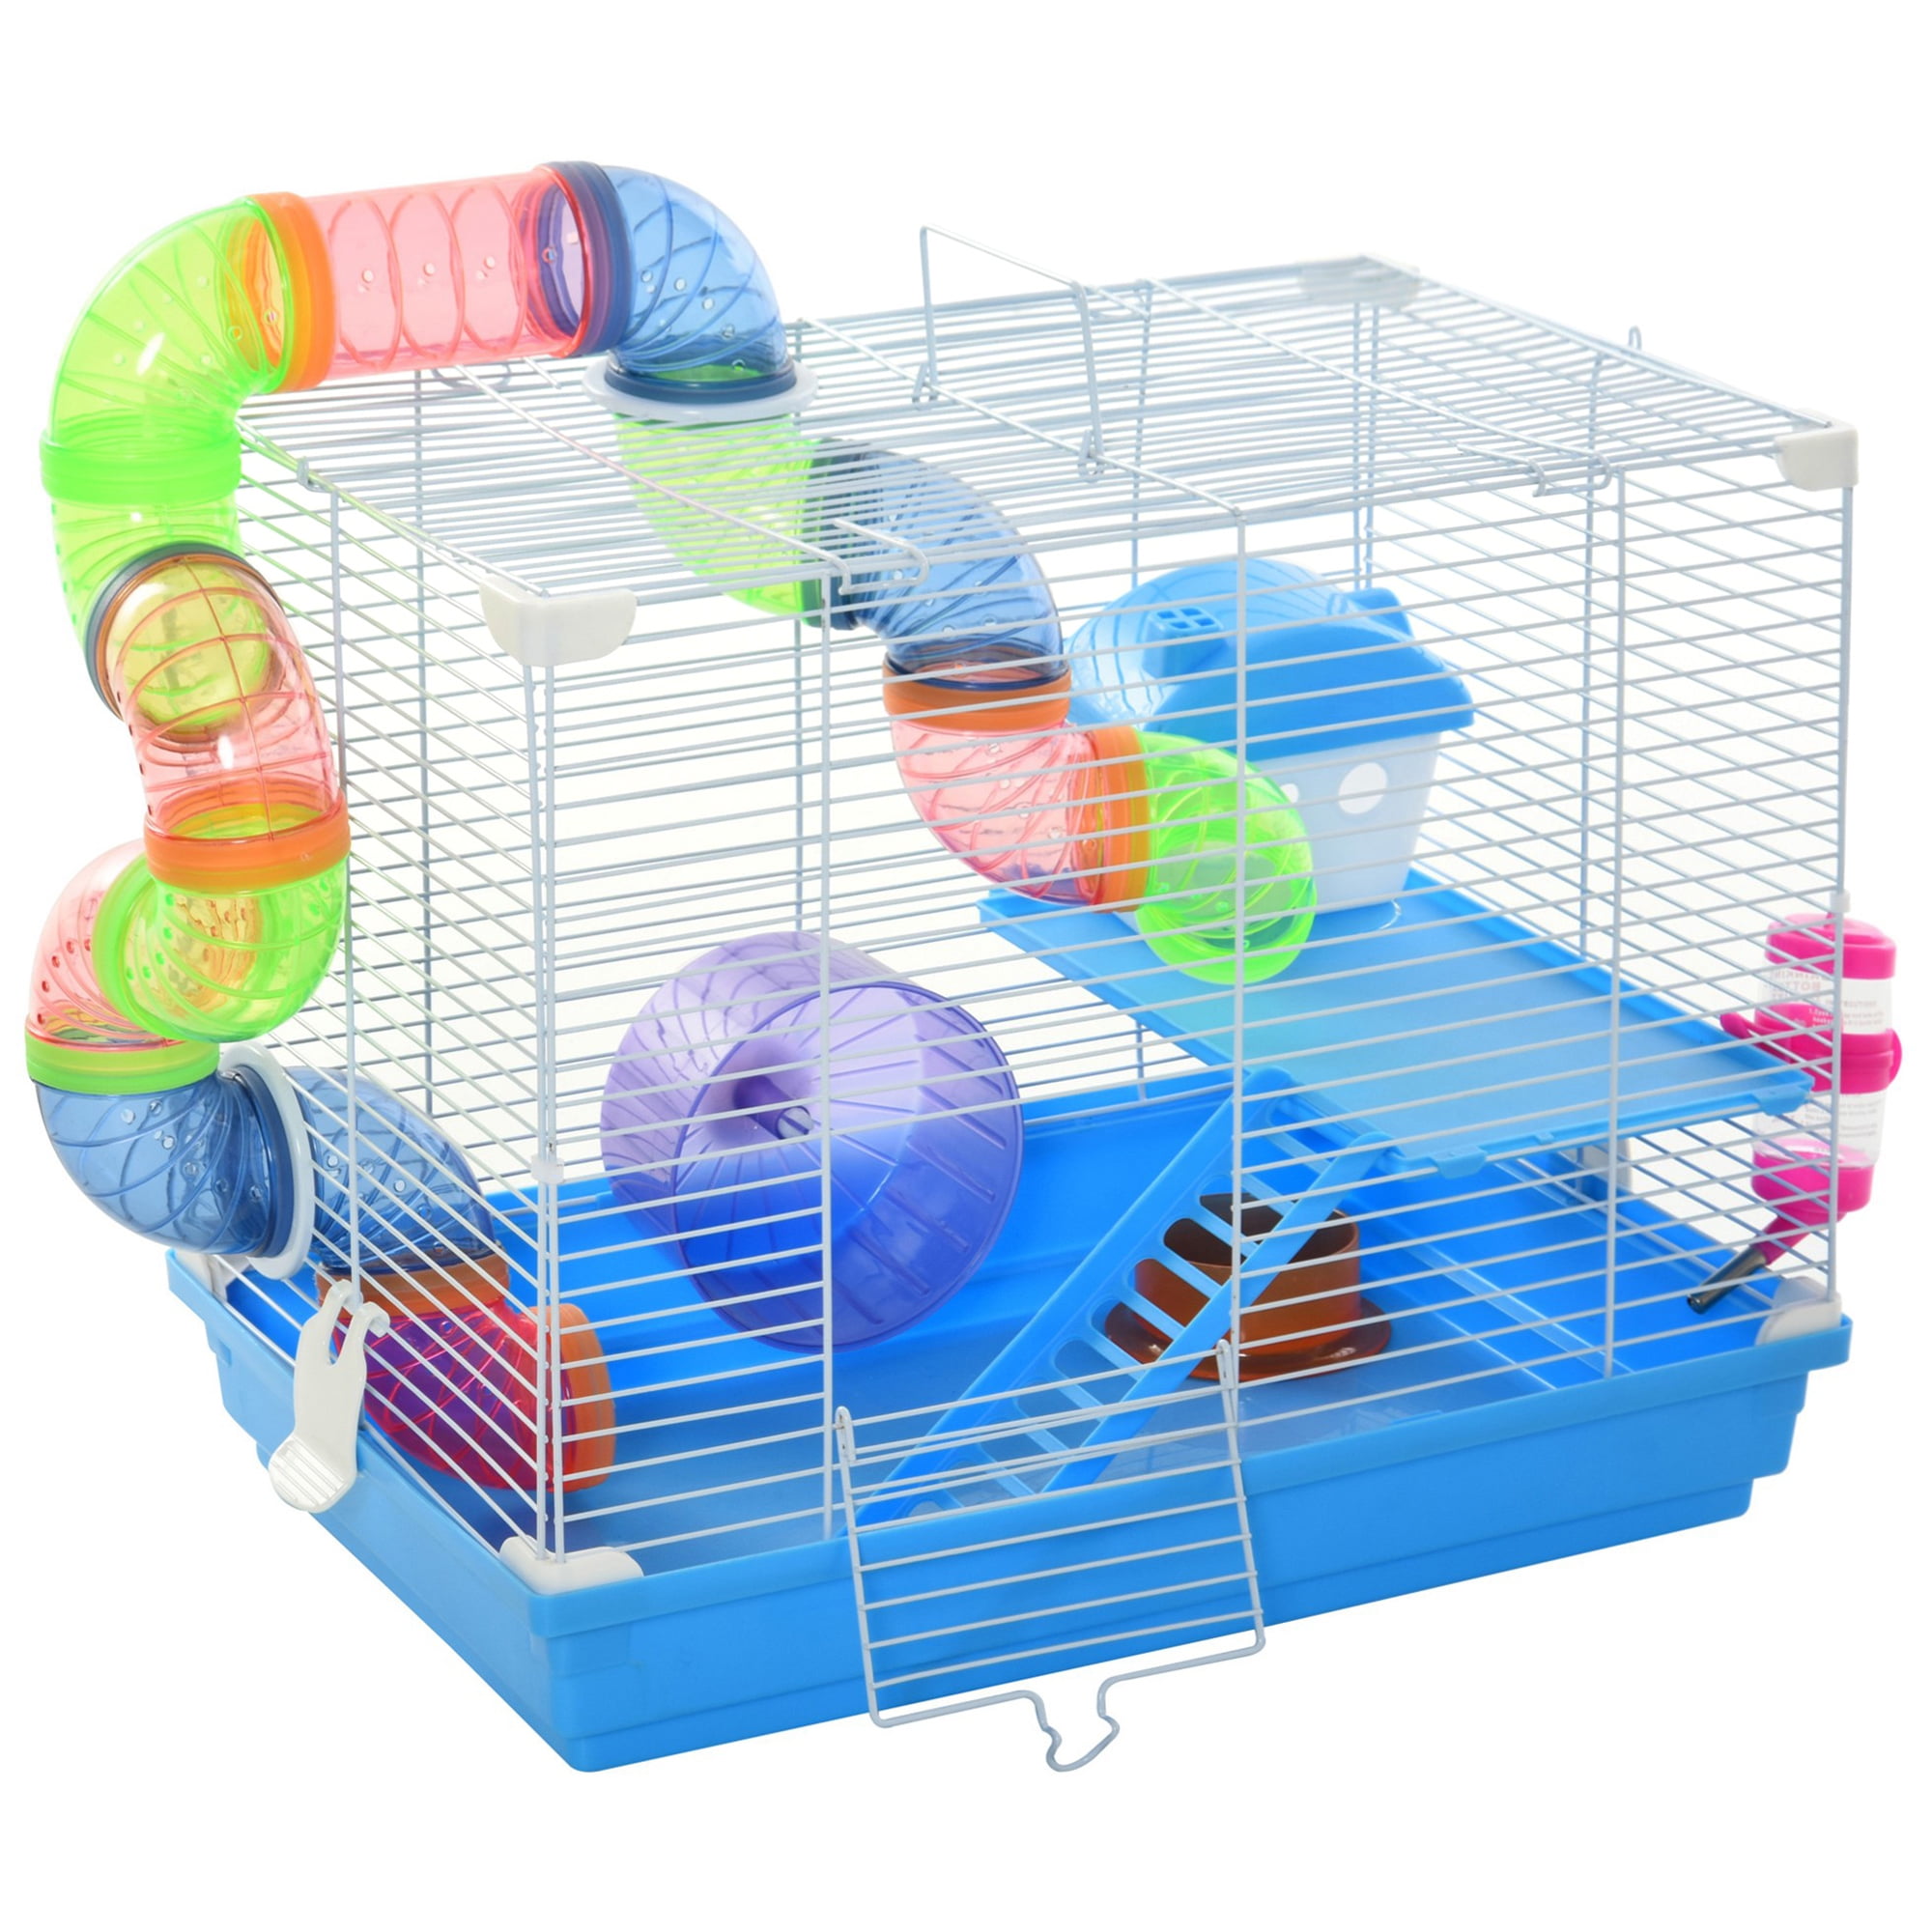 1. Plastic cages for hamsters: A popular choice for pet owners